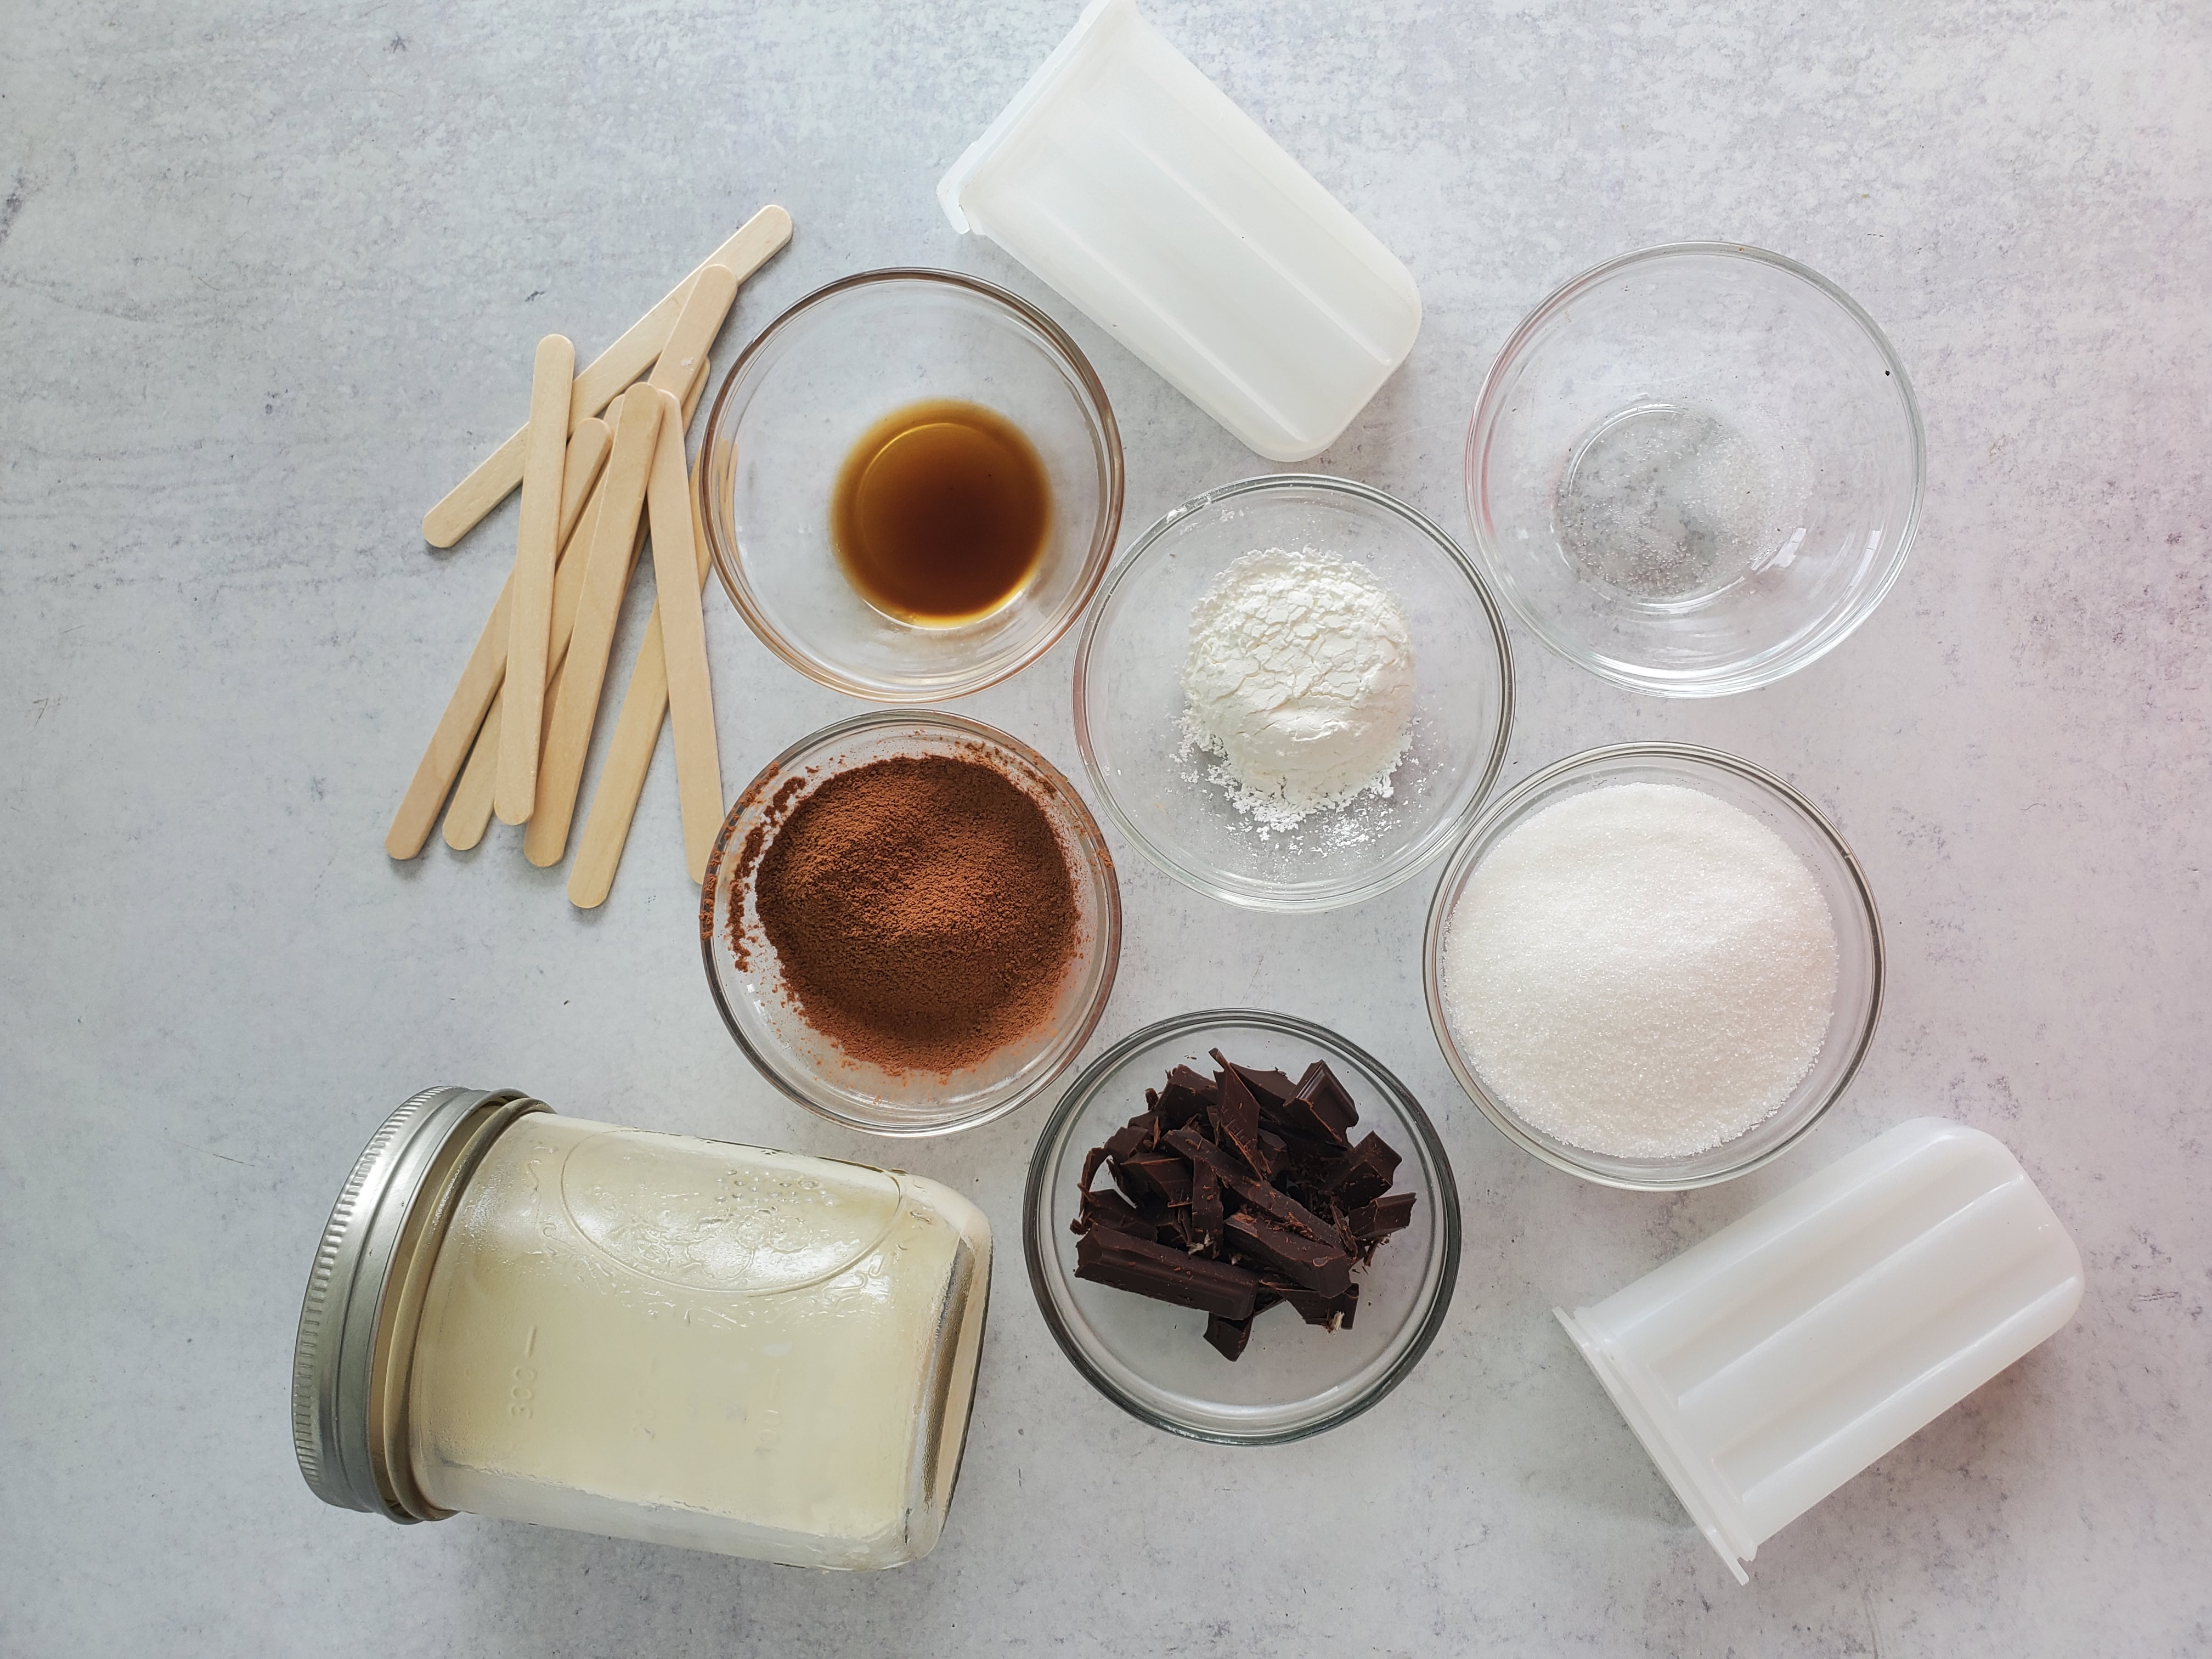 ingredients for homemade fudge popsicles